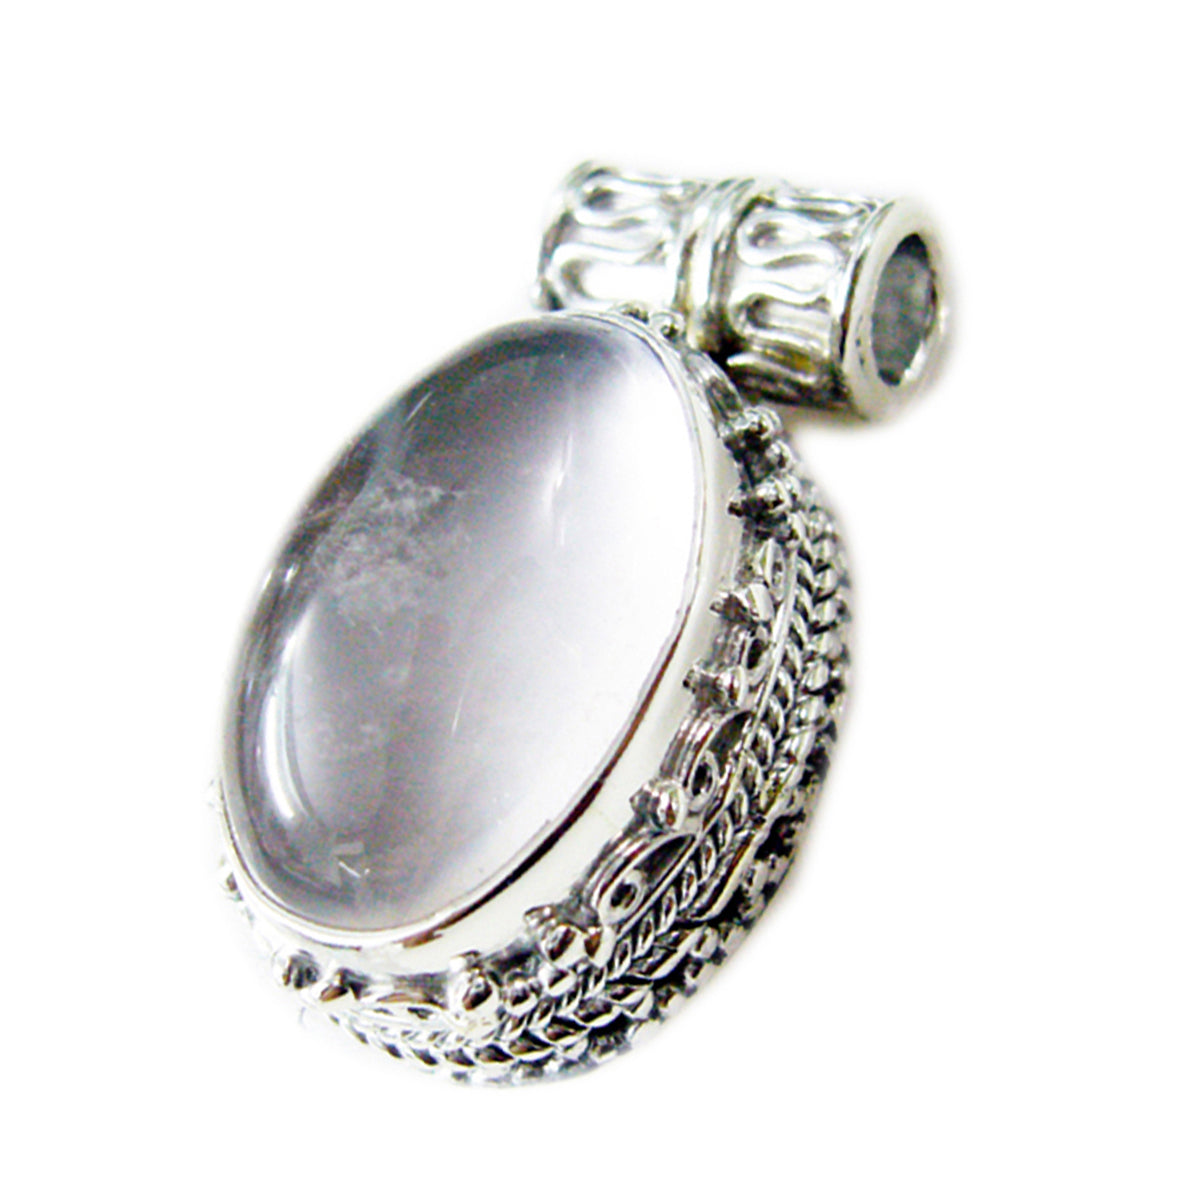 Riyo Real Gems Oval Cabochon Pink Rose Quartz Solid Silver Pendant Gift For Good Friday